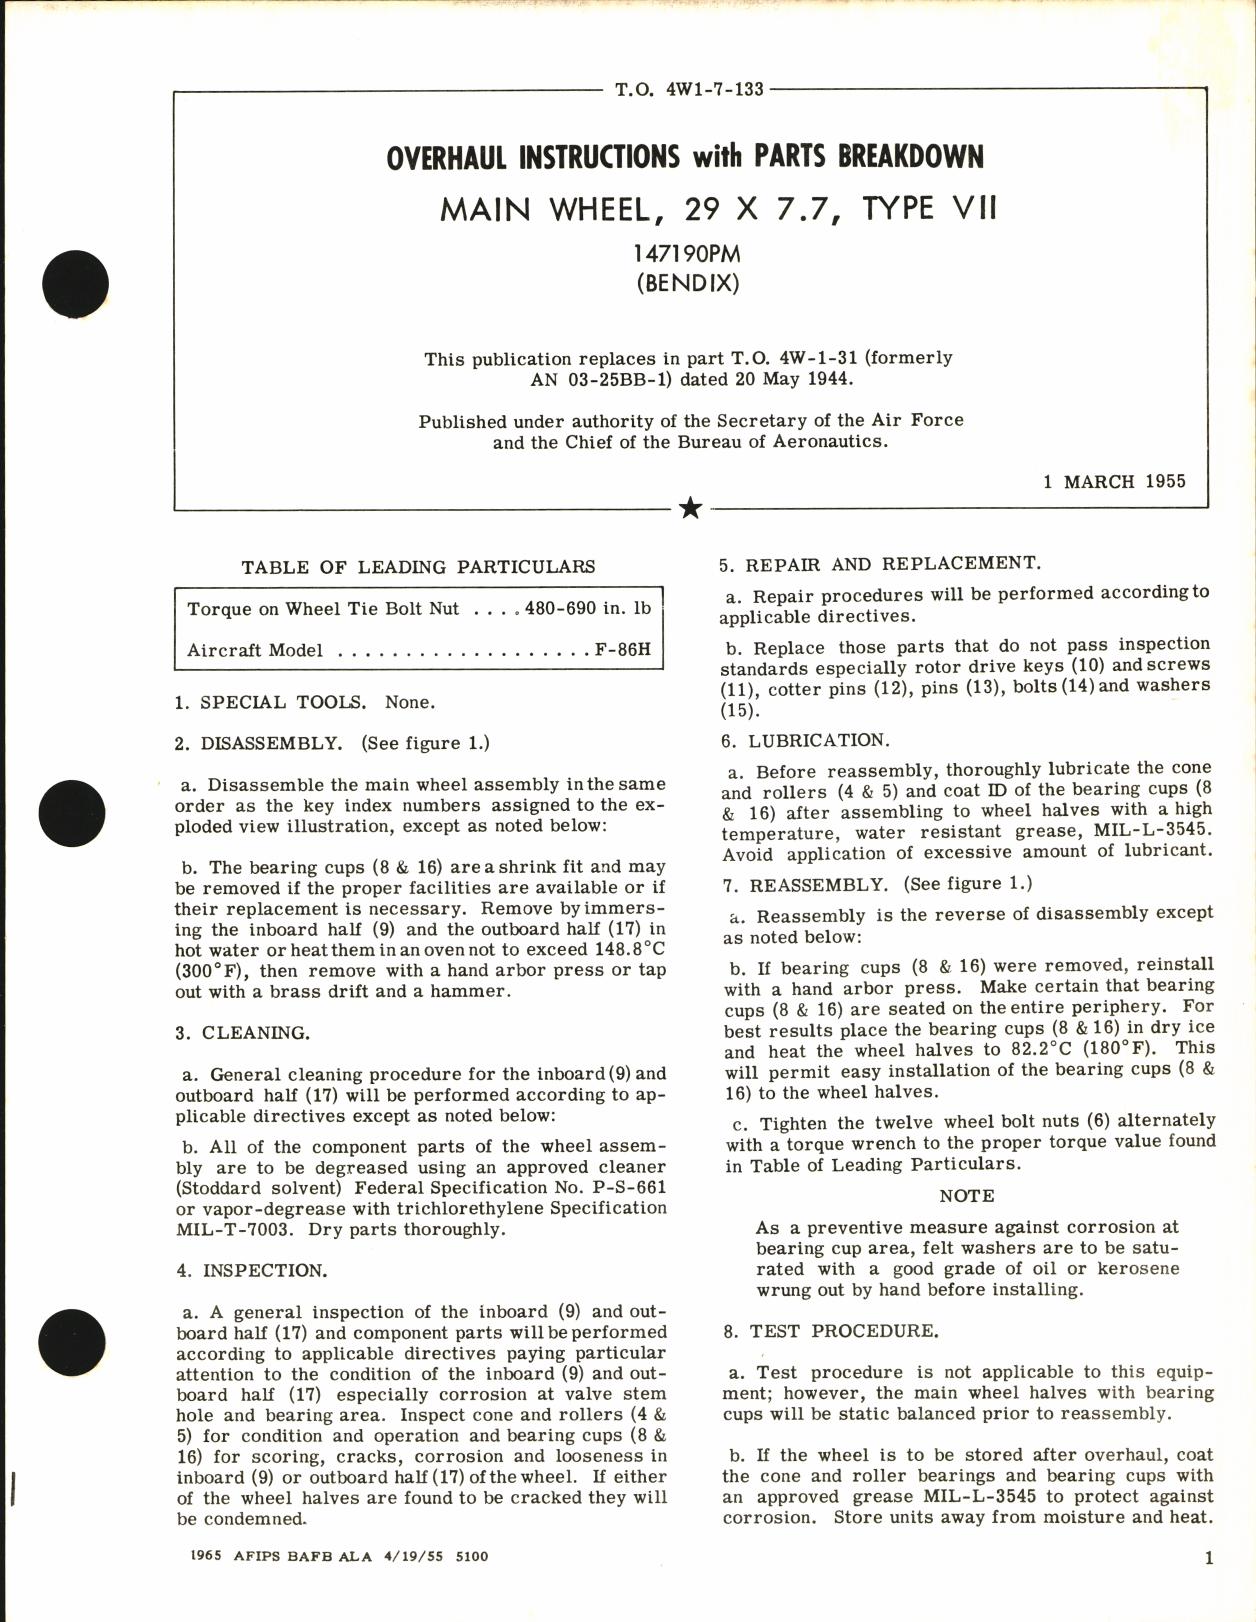 Sample page 1 from AirCorps Library document: Overhaul Instructions with Parts Breakdown for Main Wheel 29 x 7.7, Type VII